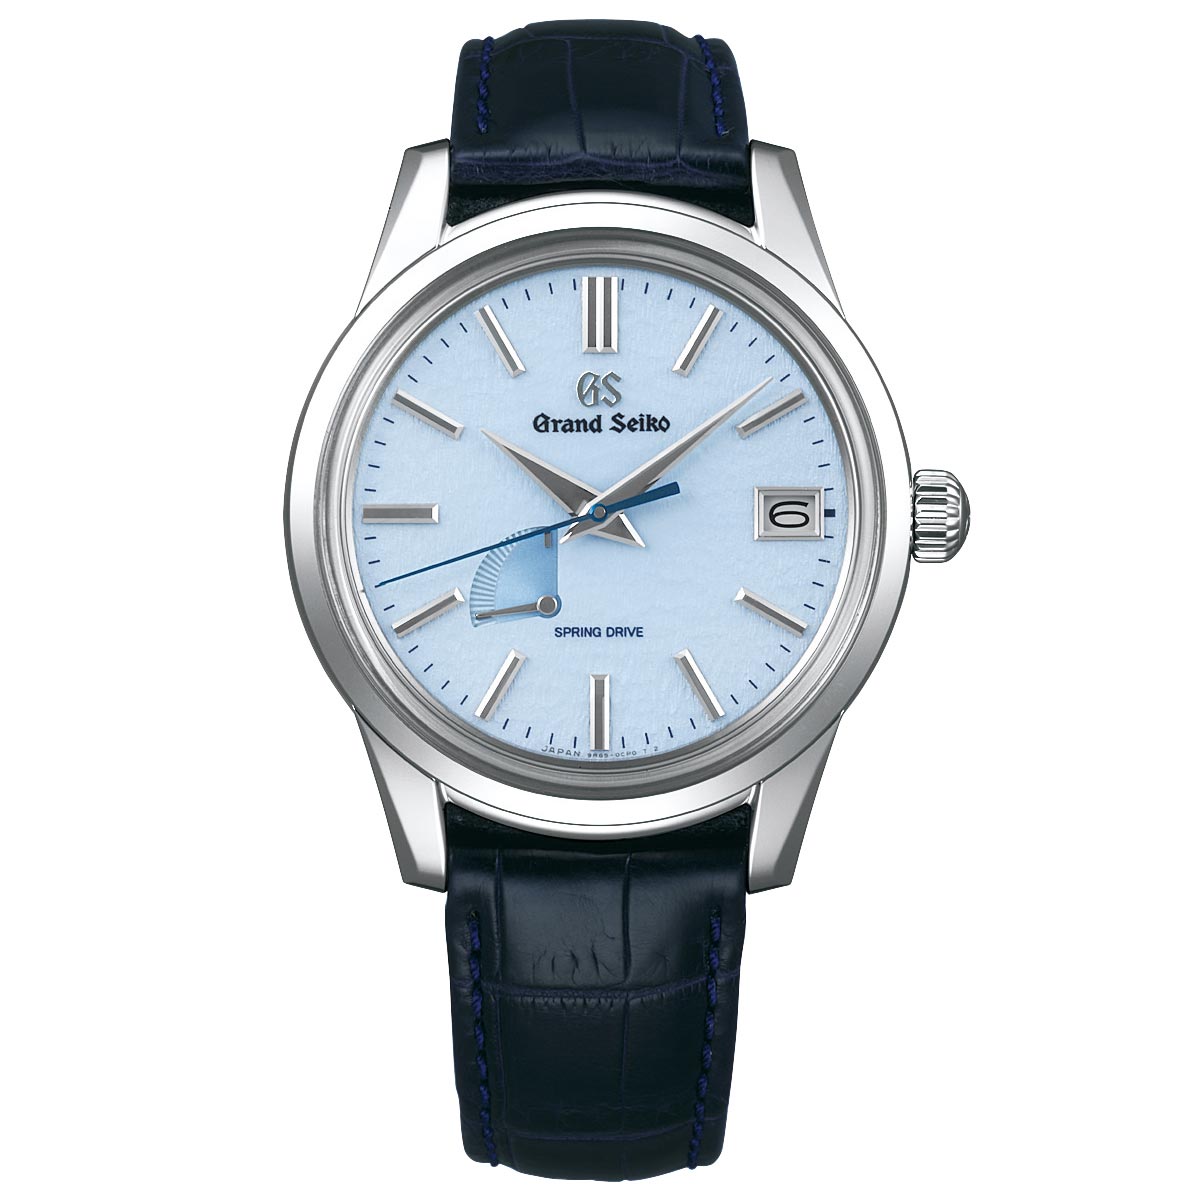 Grand Seiko Elegance Collection Spring Drive 40.2mm Watch